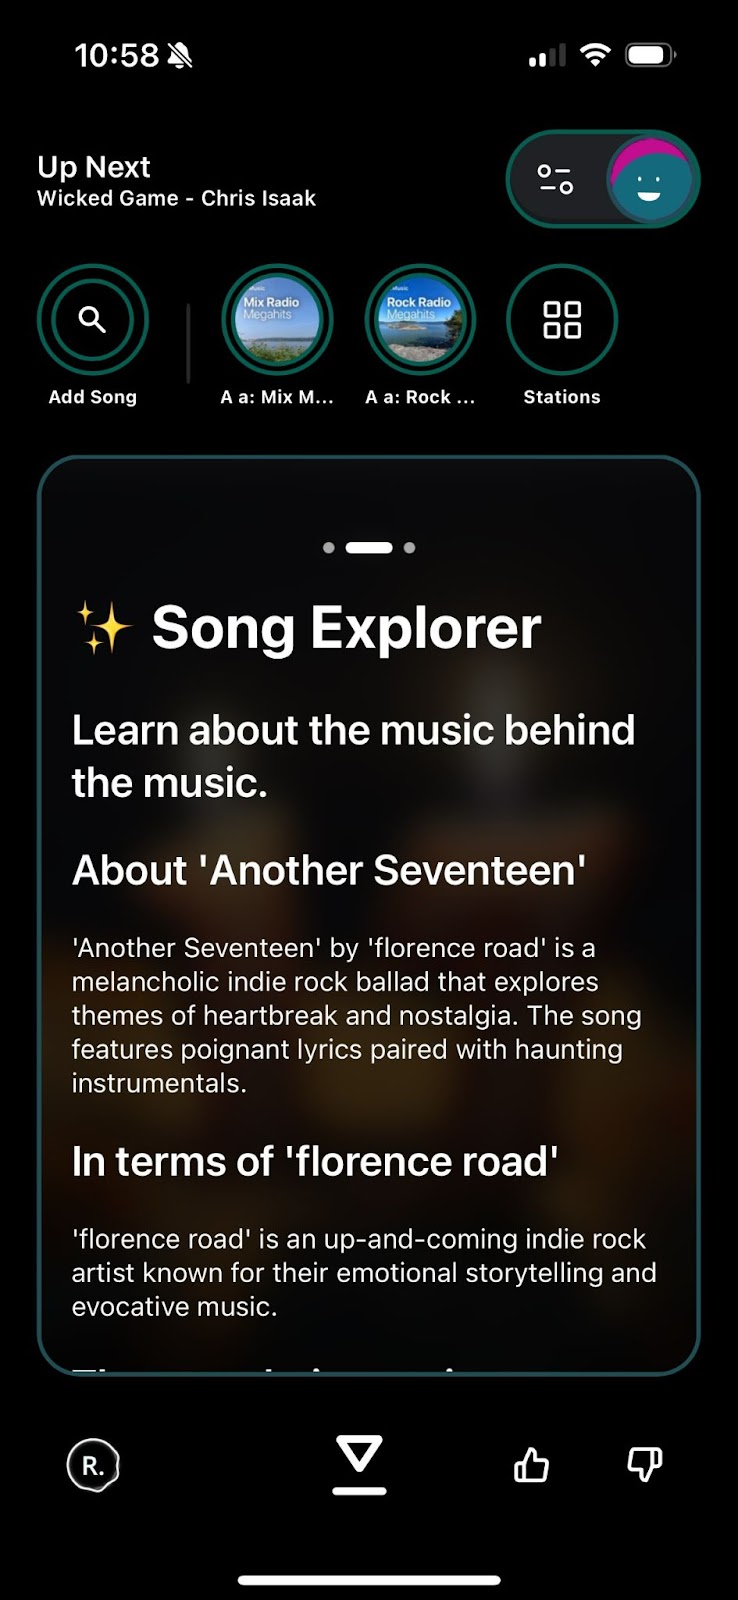 Alt=Radiant app screenshot showing “Song Explorer” giving more intel on a song “Another Seventeen” by florence road and explaining that it has poignant lyrics and explores themes of heartbreak and nostalgia